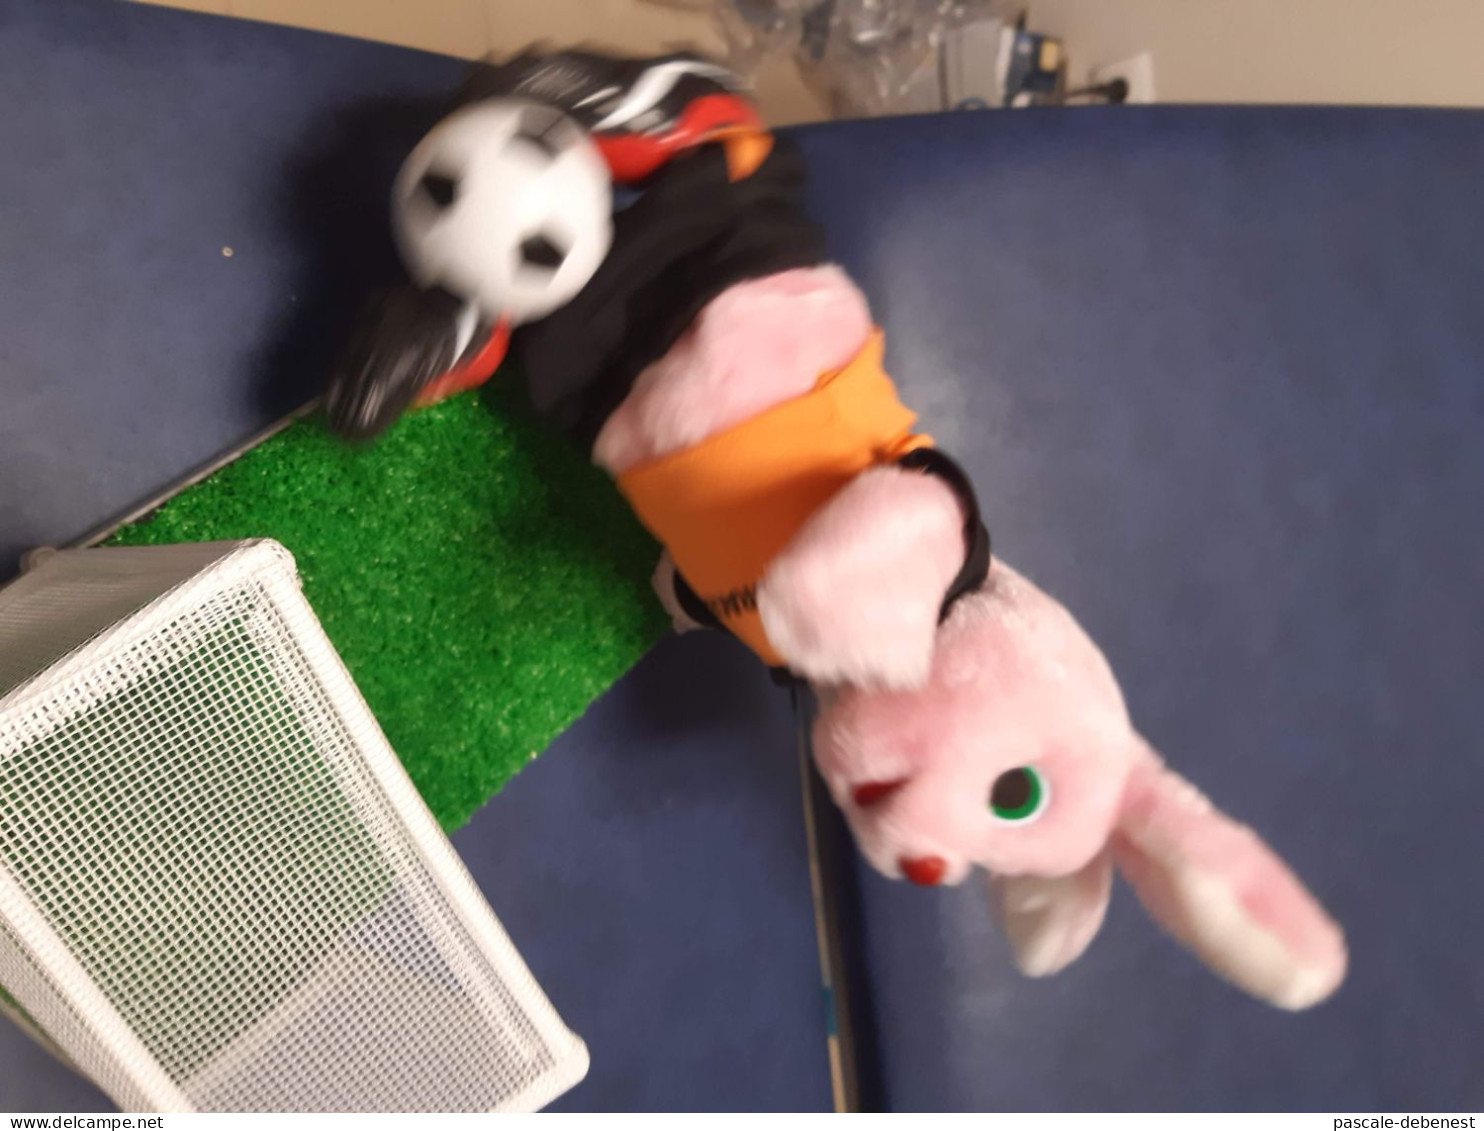 Automate Lapin "Duracell Football Bunny"